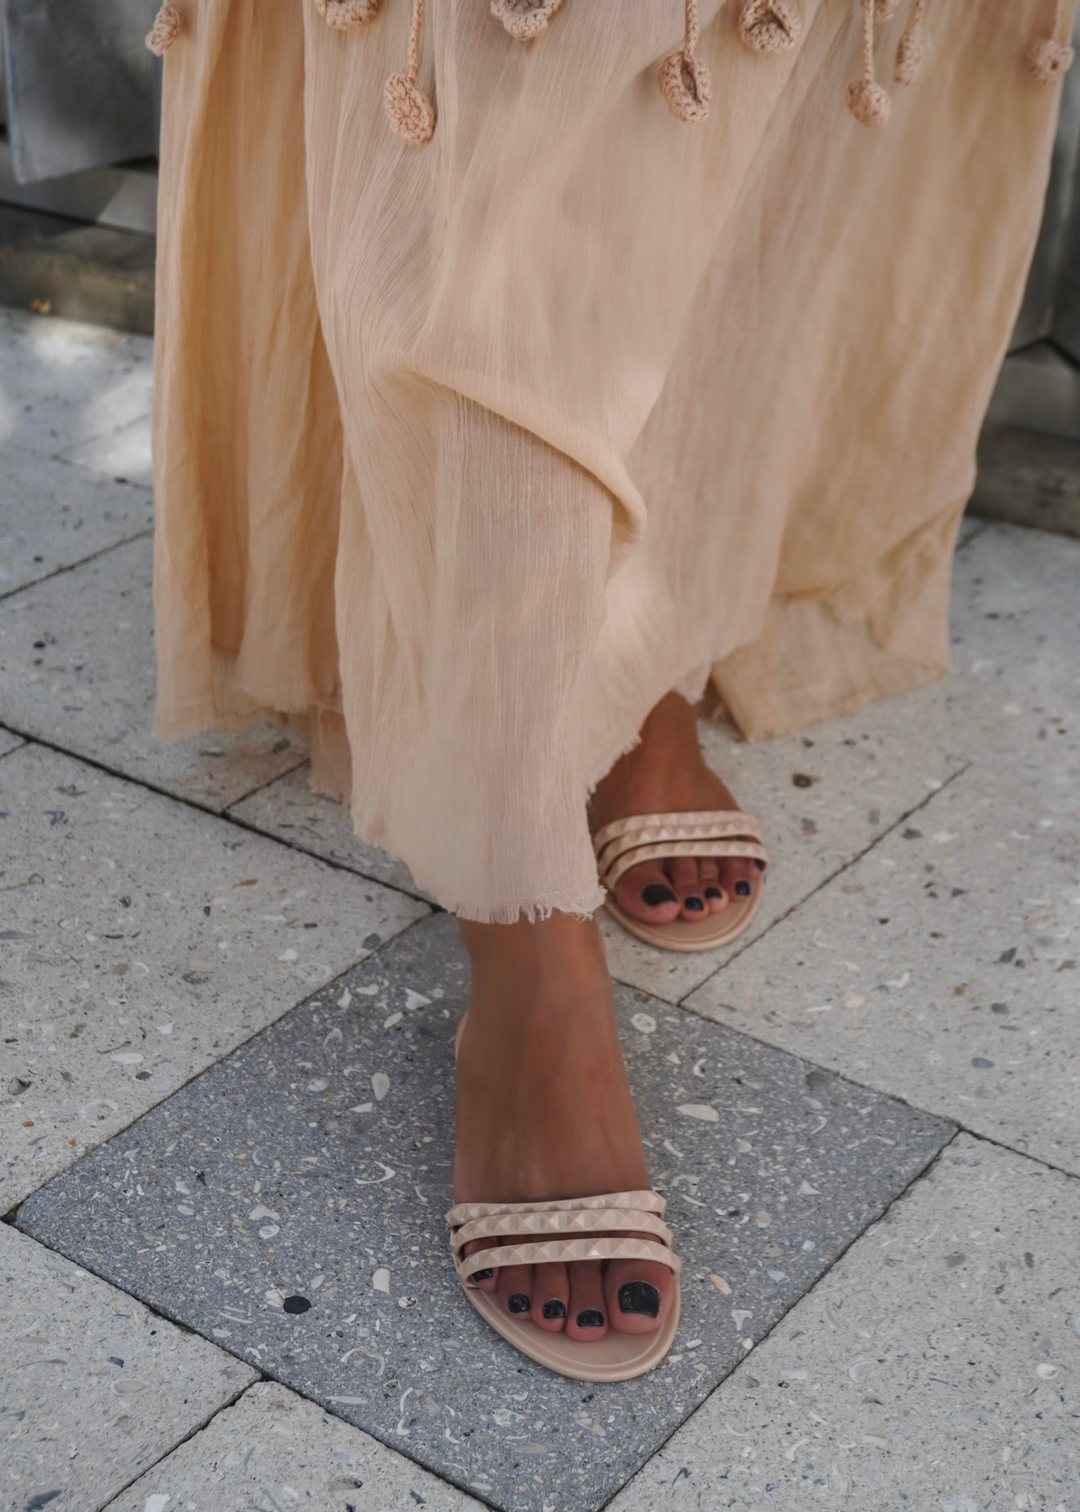 ARIA B THREE STRAP STUDDED SLIP ONS IN SOLID NUDE . Jelly sandals perfect for summer, sandals that you can wear all day long.